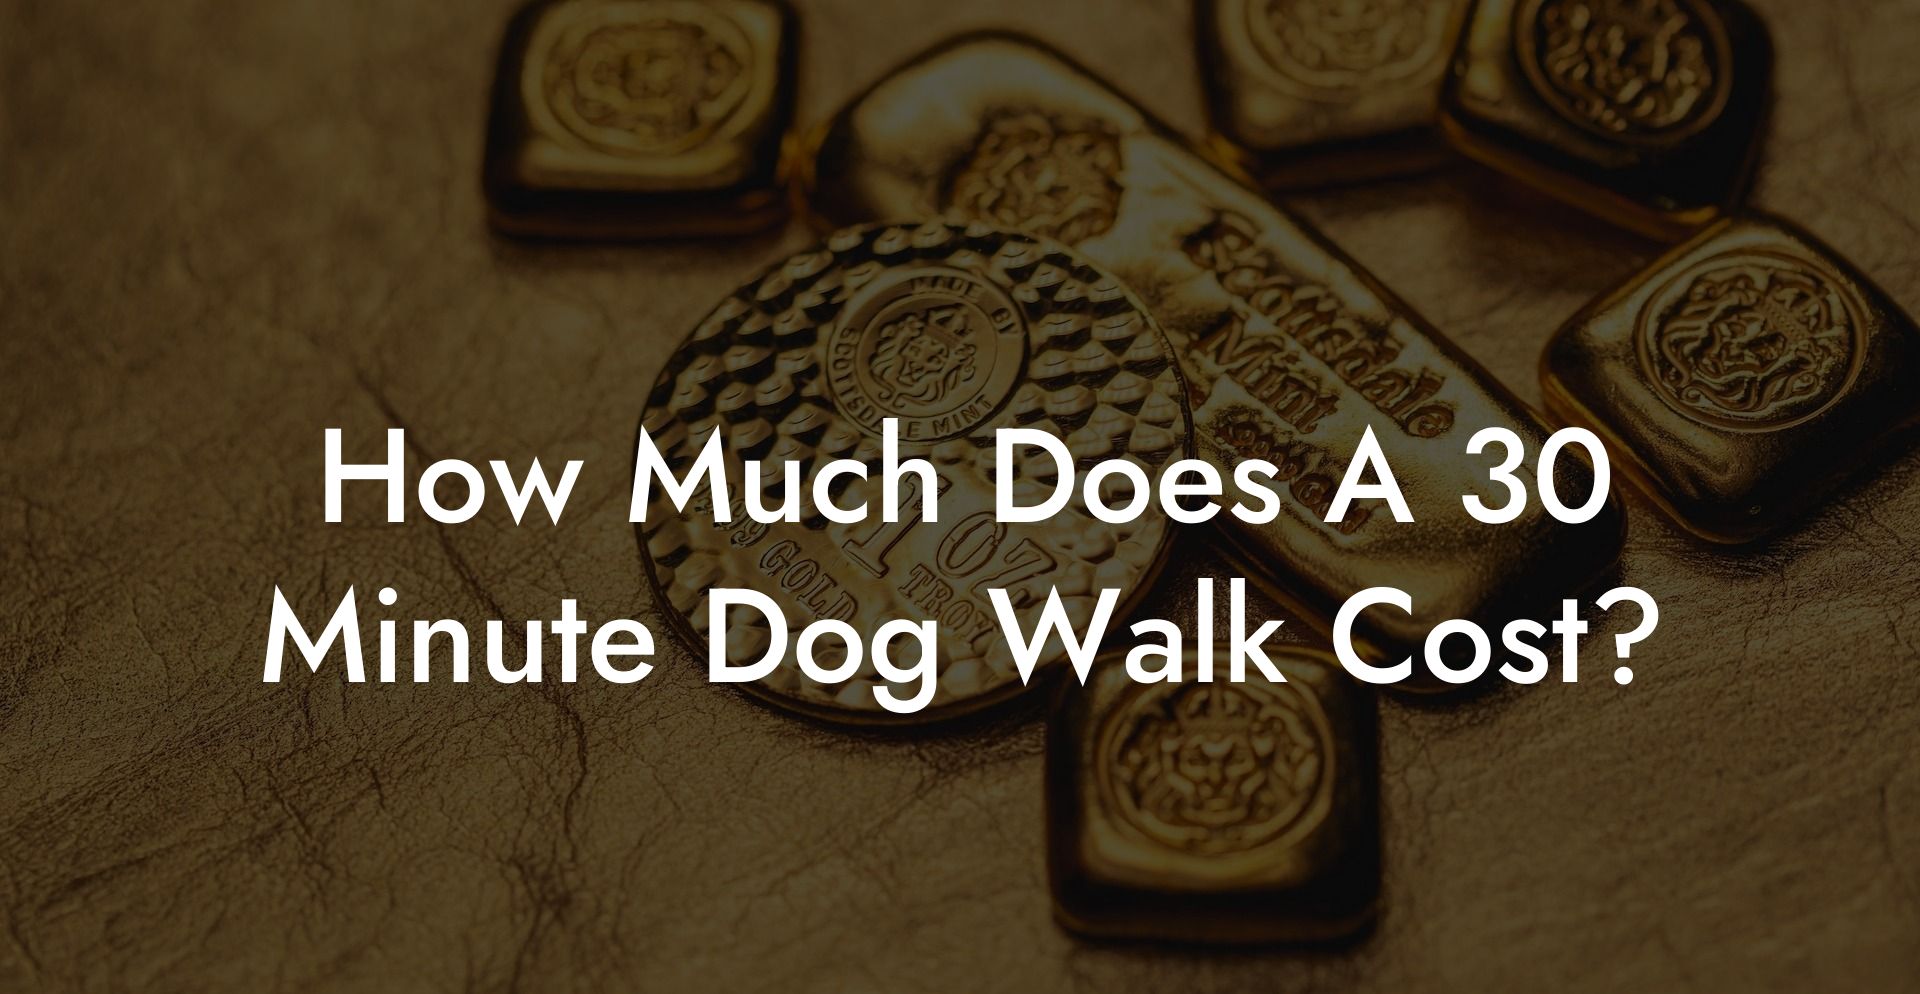 How Much Does A 30 Minute Dog Walk Cost?